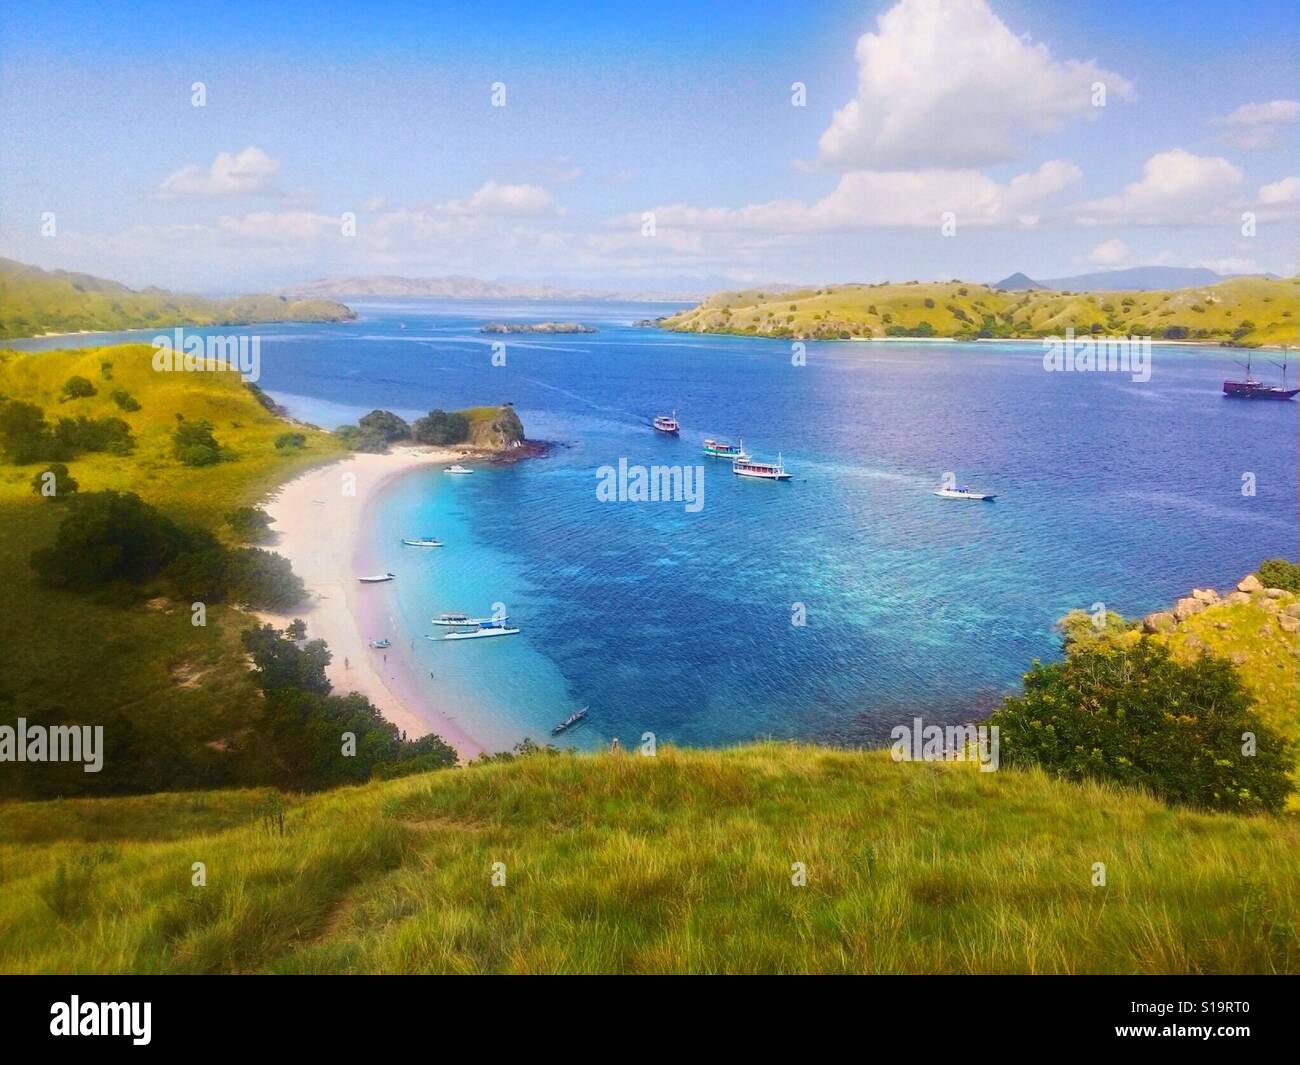 Komodo Islands Landscape With Sea View and Beach, Indonesia Stock Photo